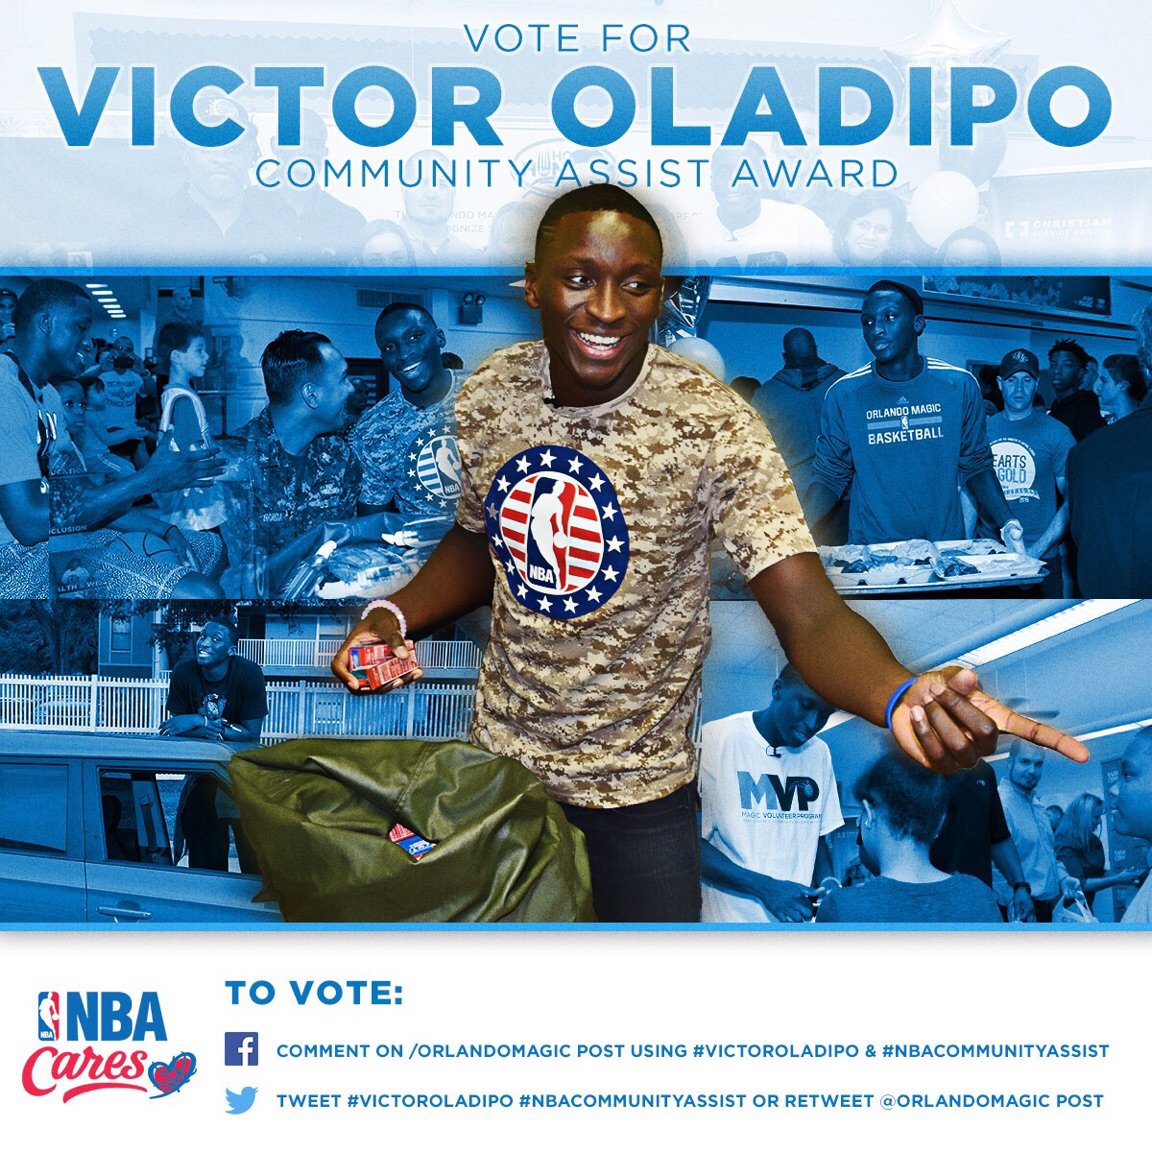 Vote for my homeboy Victor Oladipo for the NBA Community Assist! #nbacommunityassist & #victoroladipo https://t.co/6Dryzsp6RT